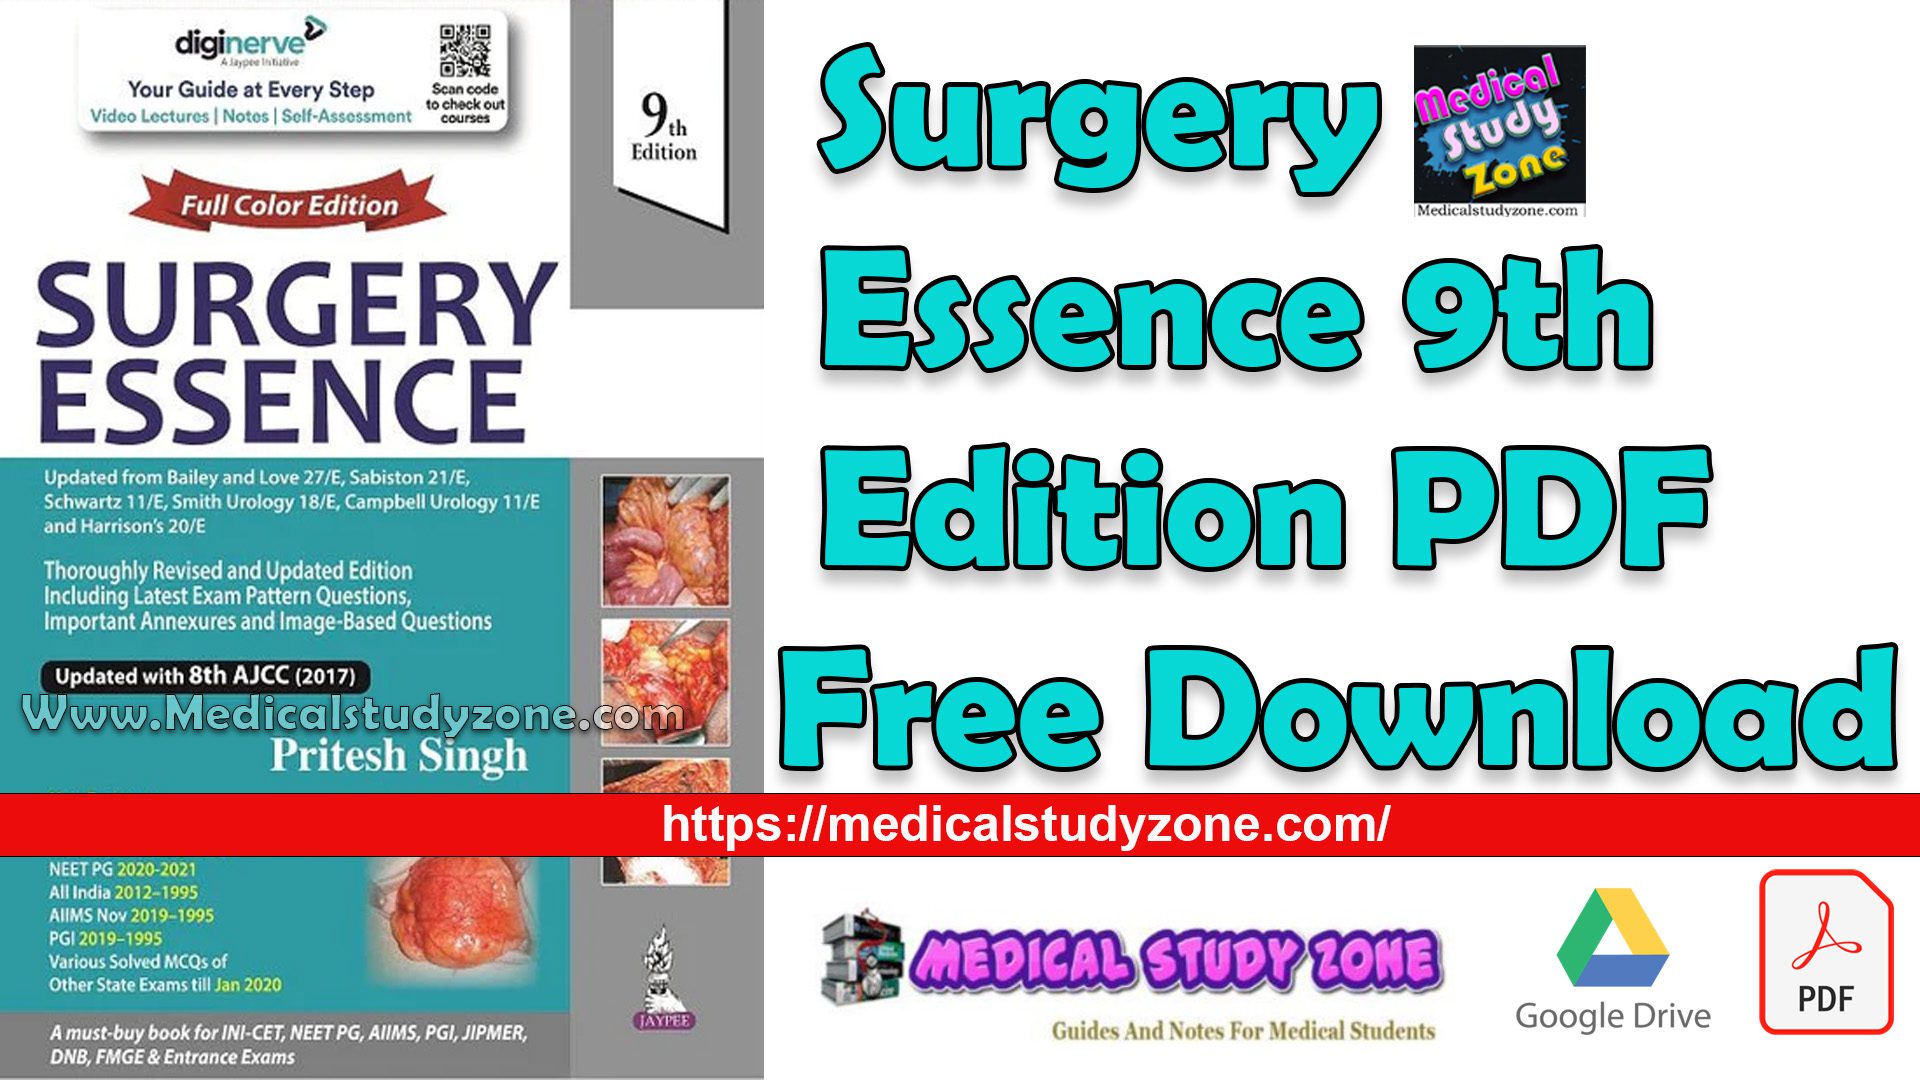 Surgery Essence 9th Edition PDF Free Download [Direct Link]